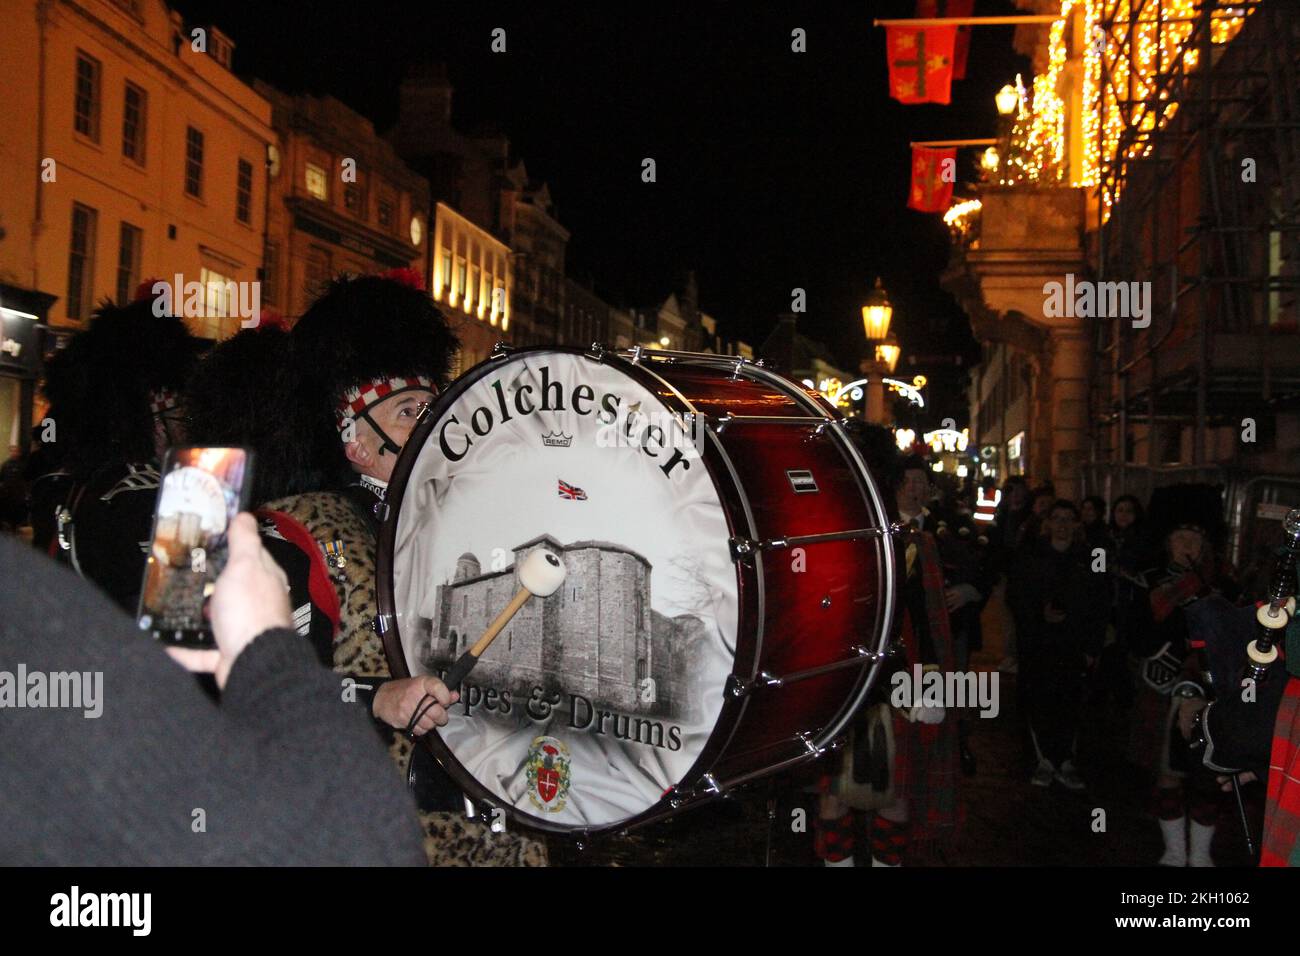 Colchester, UK. 23rd Nov 2022. Colchester, Britain's oldest recorded town, has officially become a city this evening after the letters patent were presented to the Mayor, Cllr Tim Young. A procession ahead of the ceremony left the Mercury Theatre and arrived at the Town Hall led by the Colchester Pipes and Drums band. Credit: Eastern Views/Alamy Live News Stock Photo